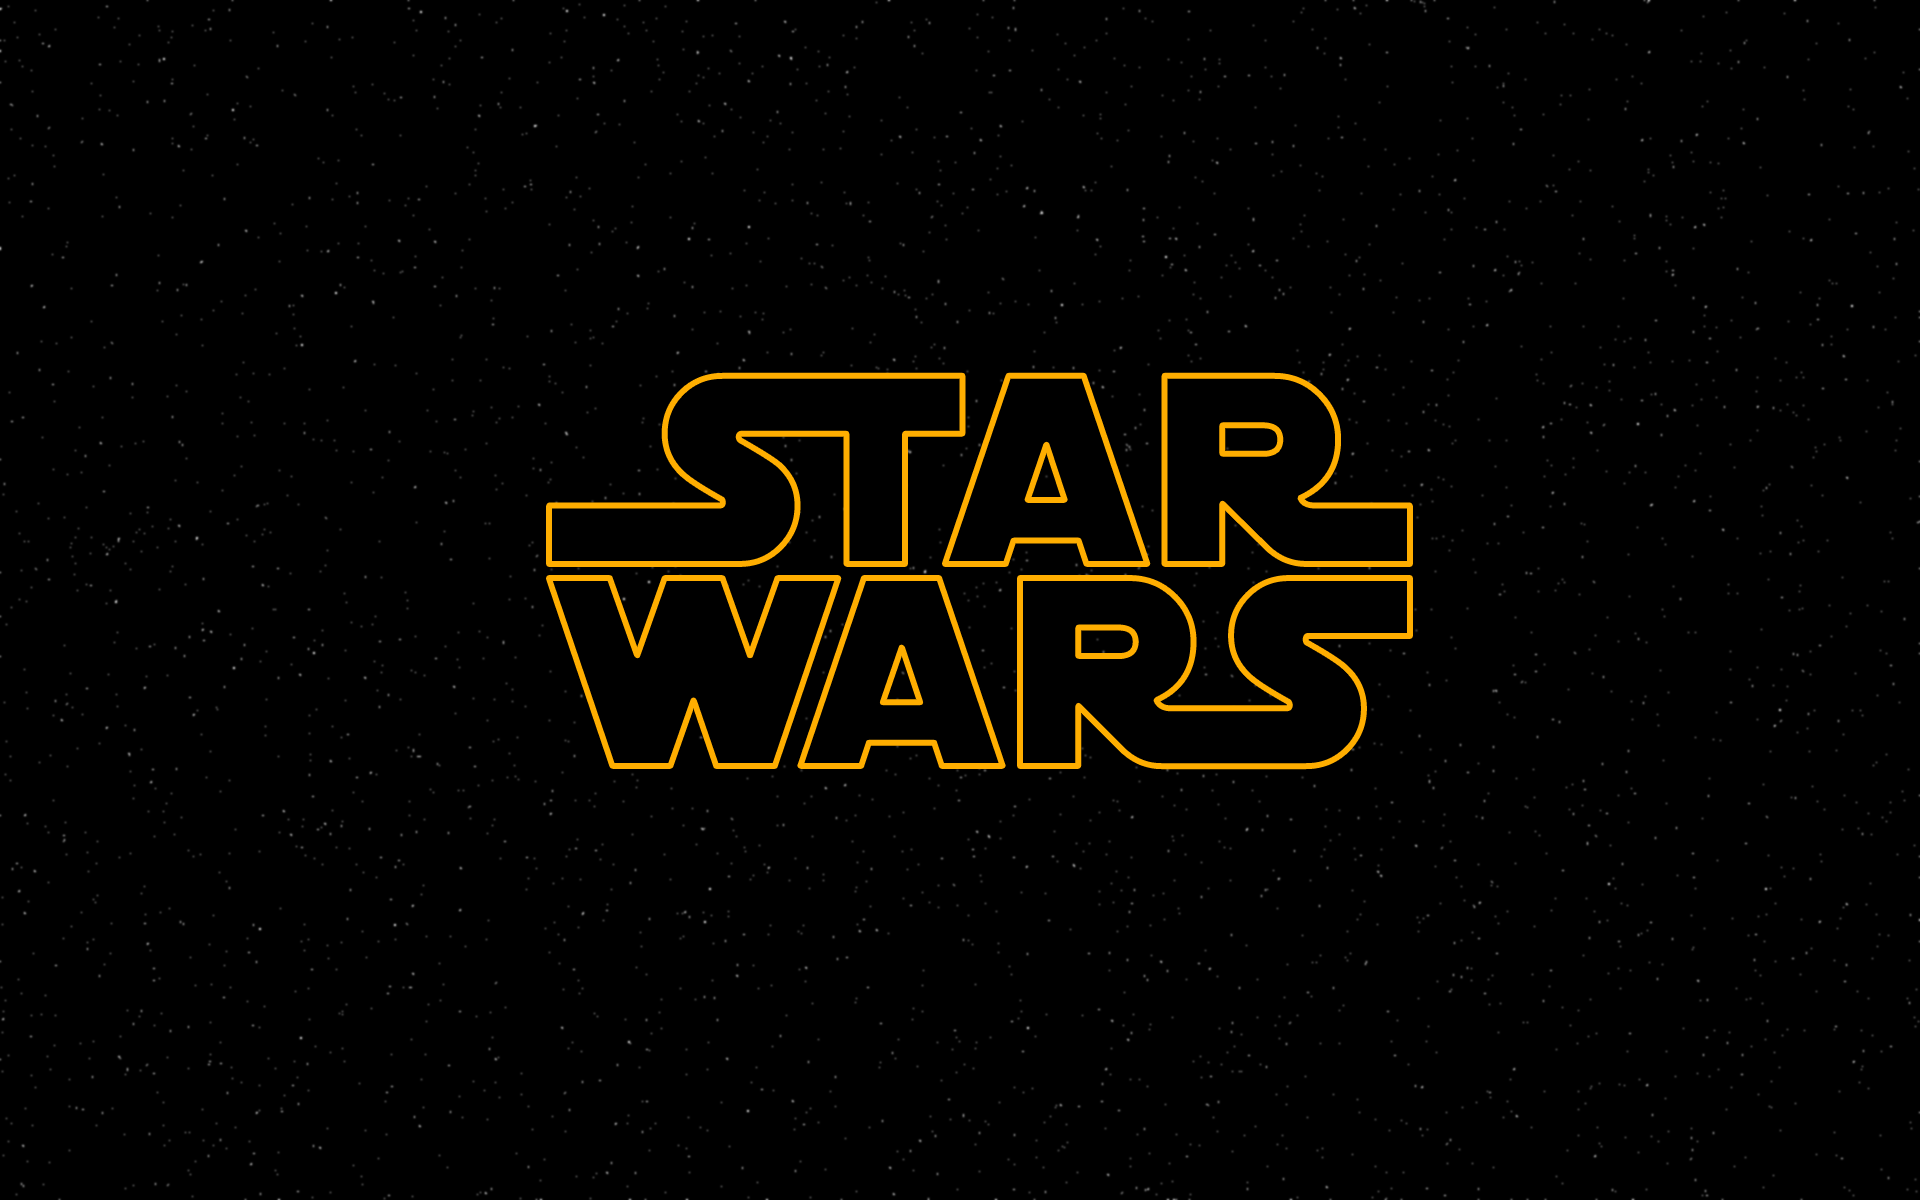 Star Wars Logo Wallpapers 28512 1920x1200 px